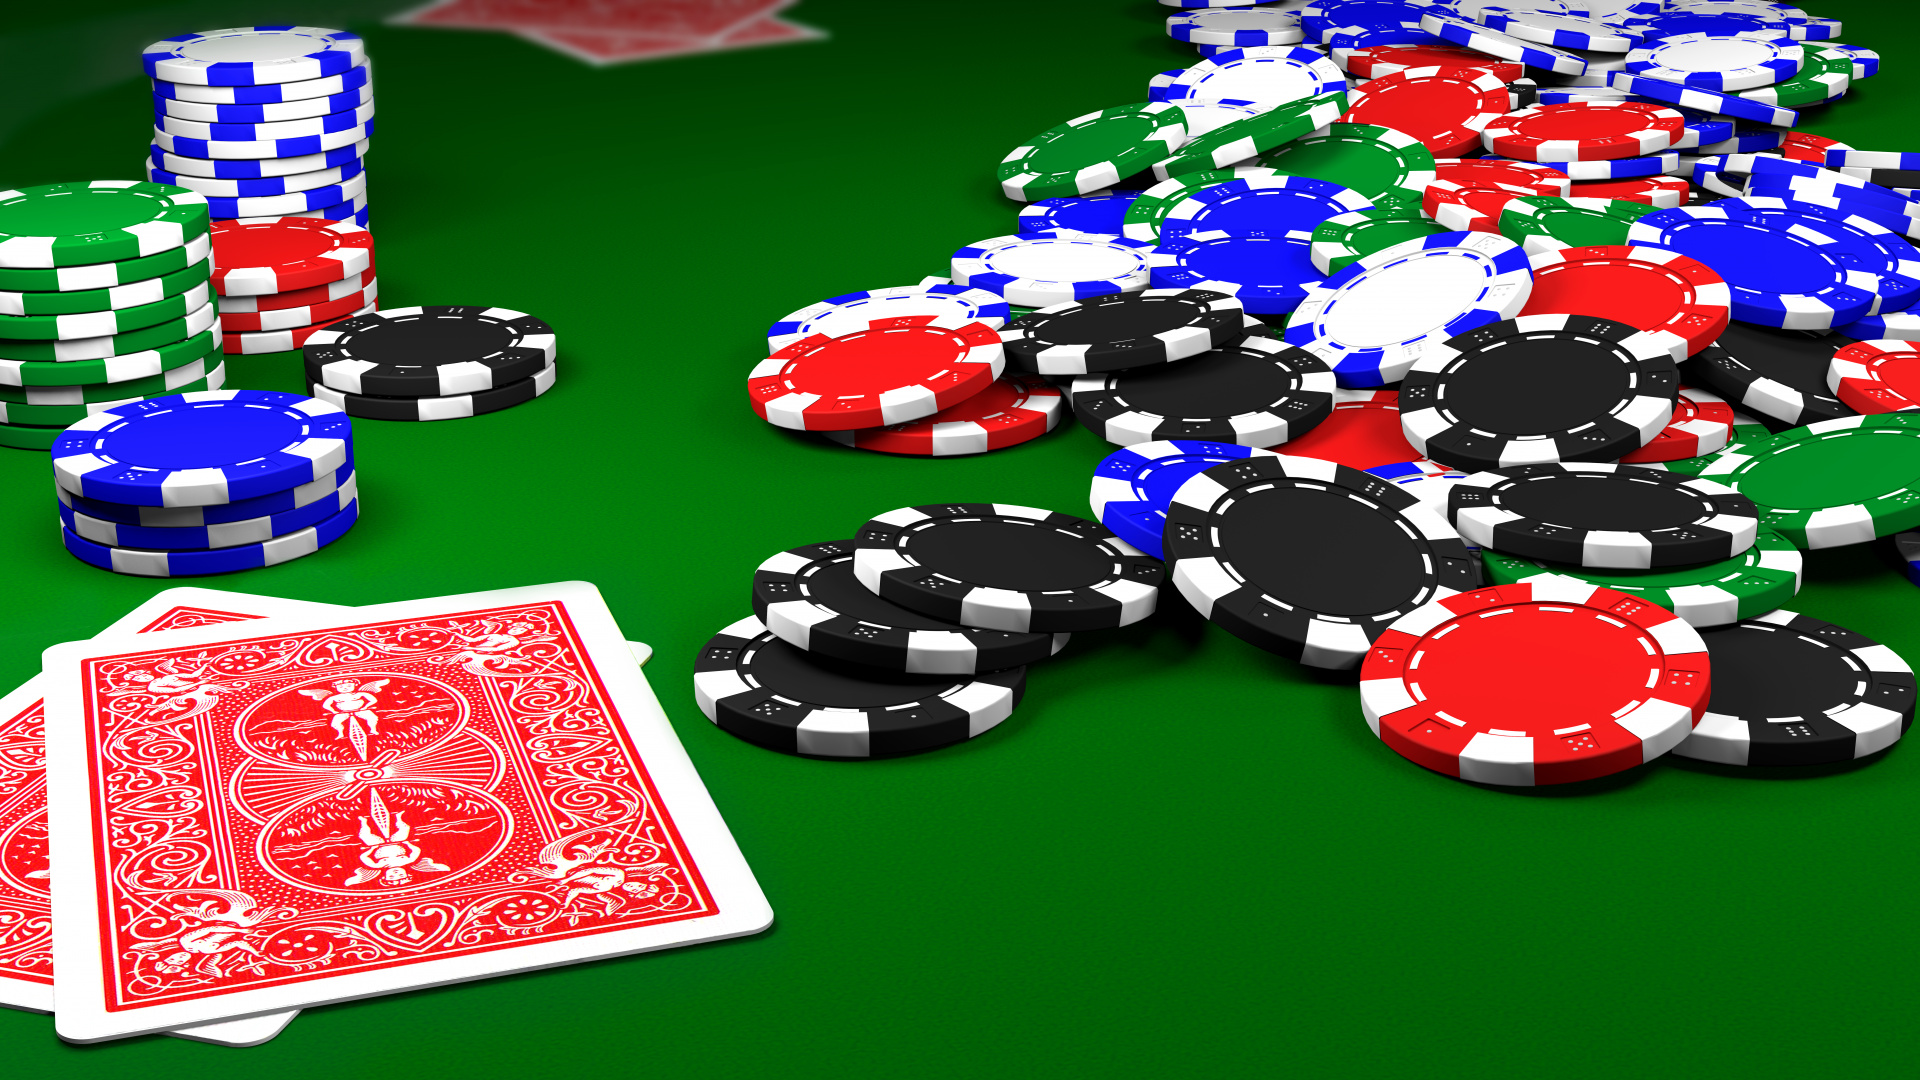 Poker: Clay chips, Casino poker chips, A standardized size, 3.9cm in diameter, 3.5cm thick. 1920x1080 Full HD Background.